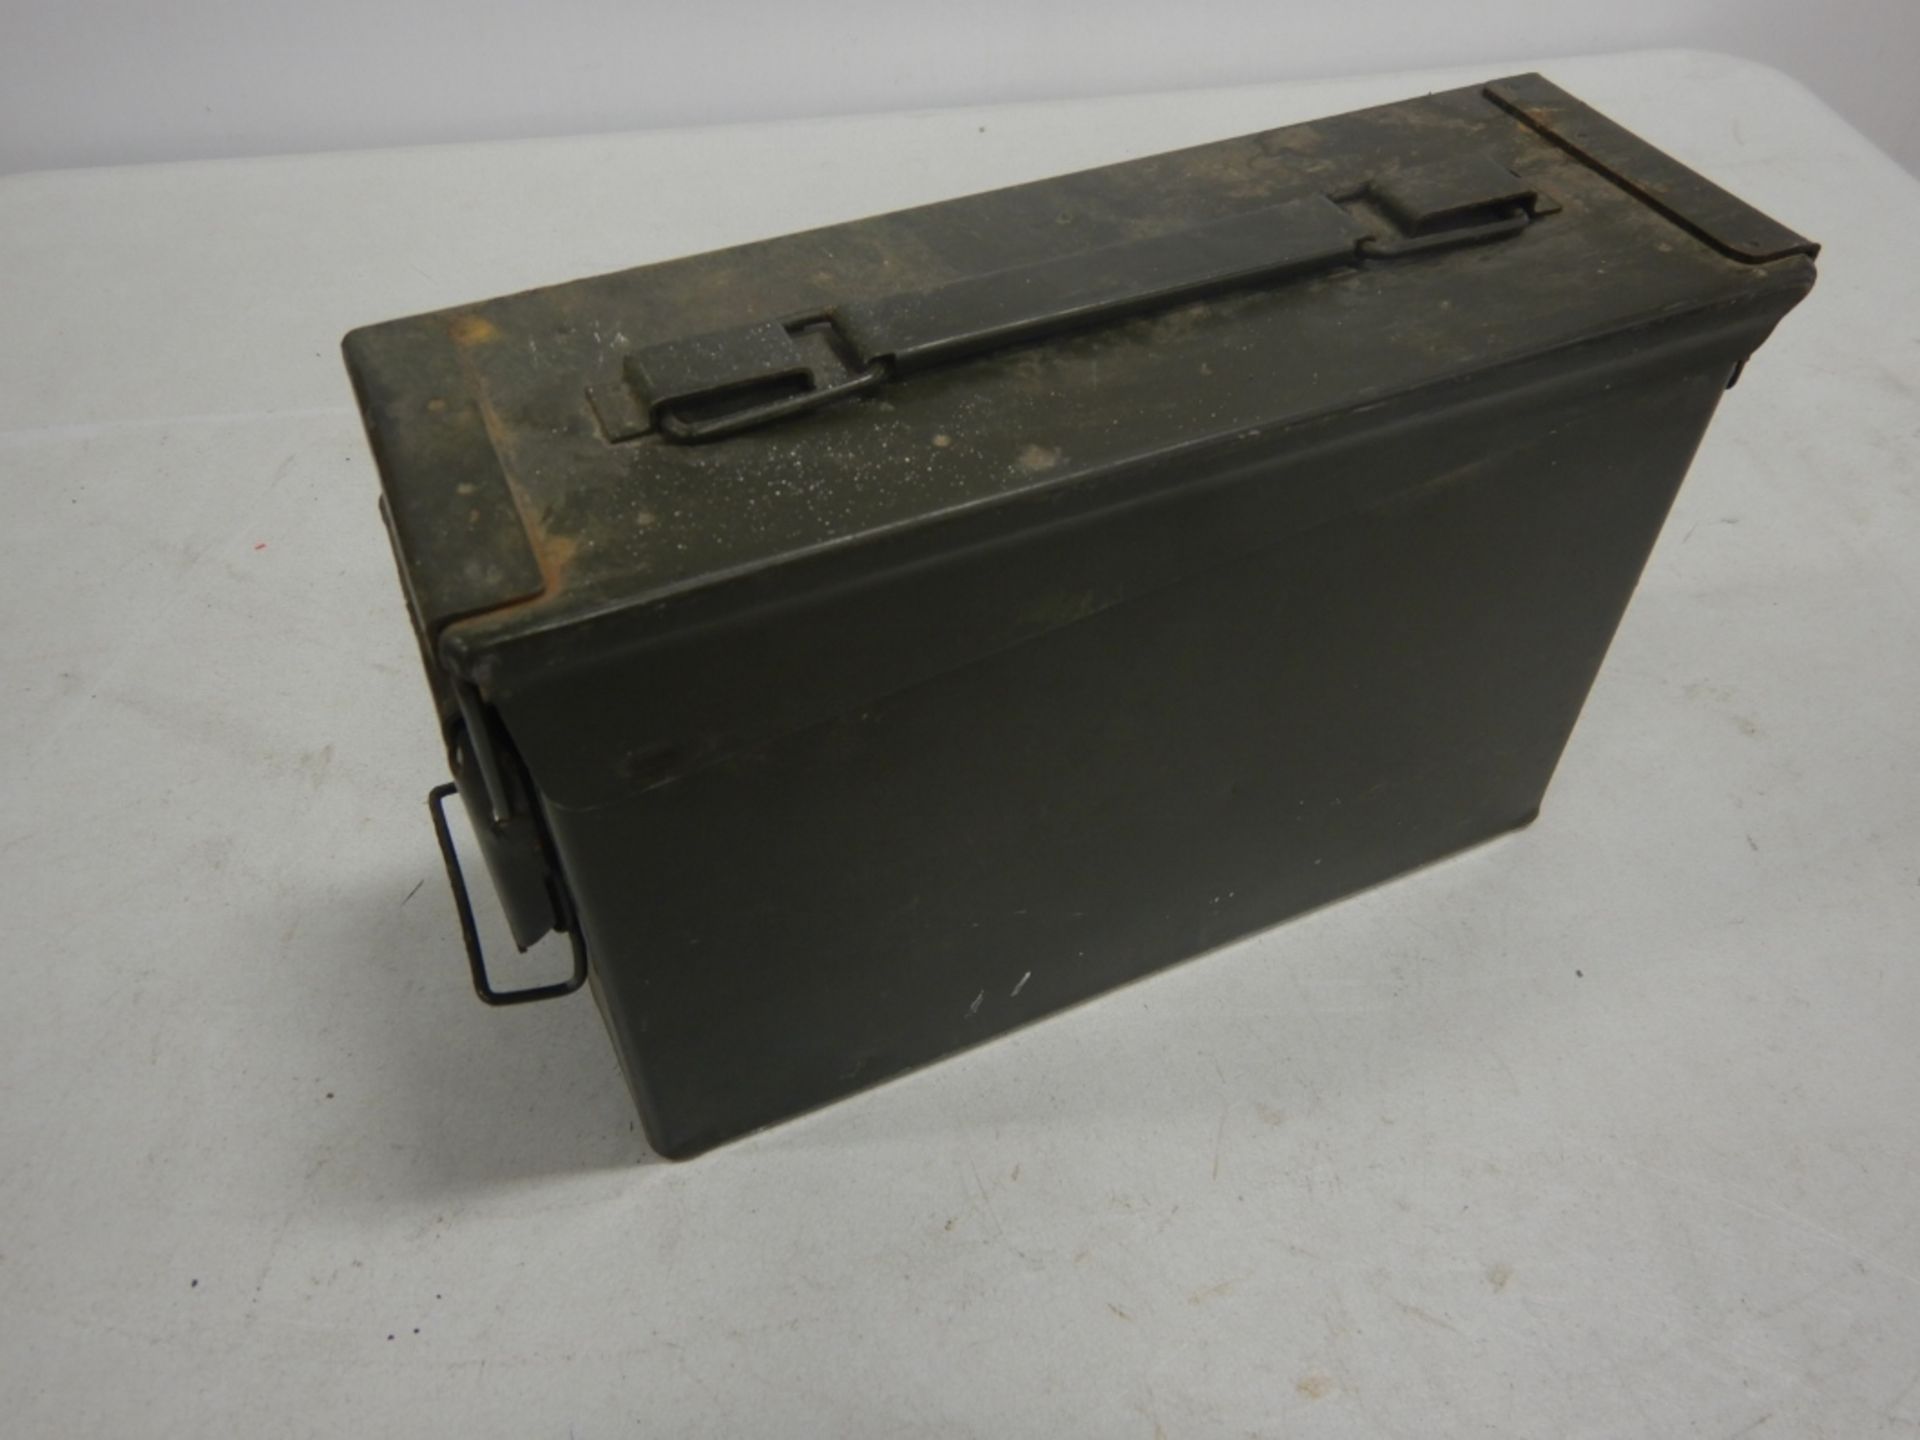 L/O CAR TIRE DOLLY, AMMO BOX, ASSORTED TOOLS ETC. - Image 5 of 5